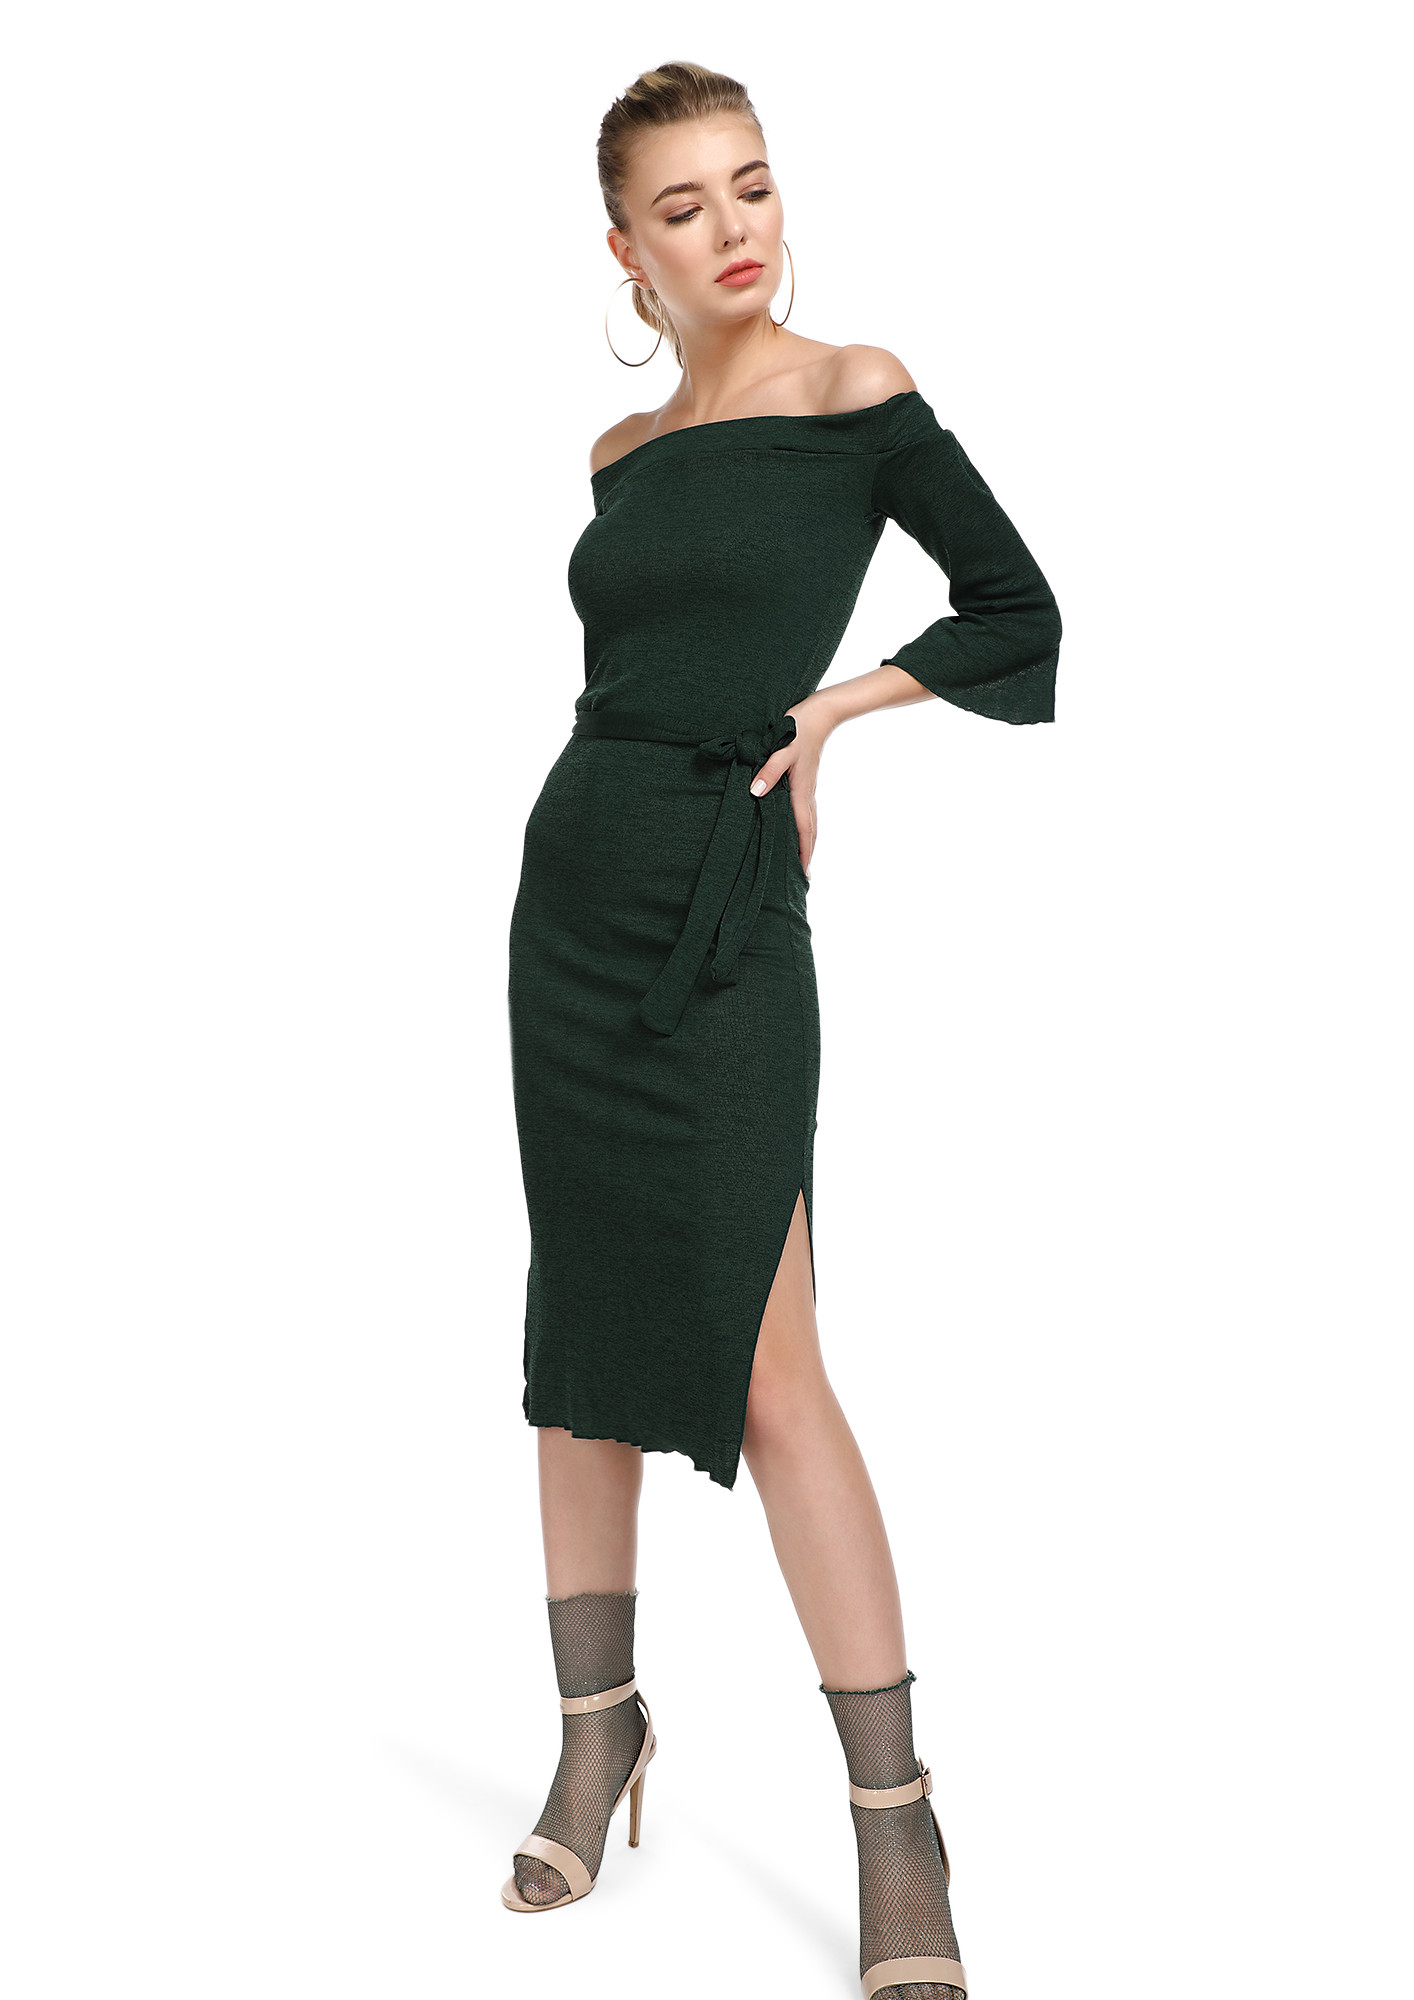 CONSIDER THE MIDPOINT GREEN OFF-SHOULDER DRESS